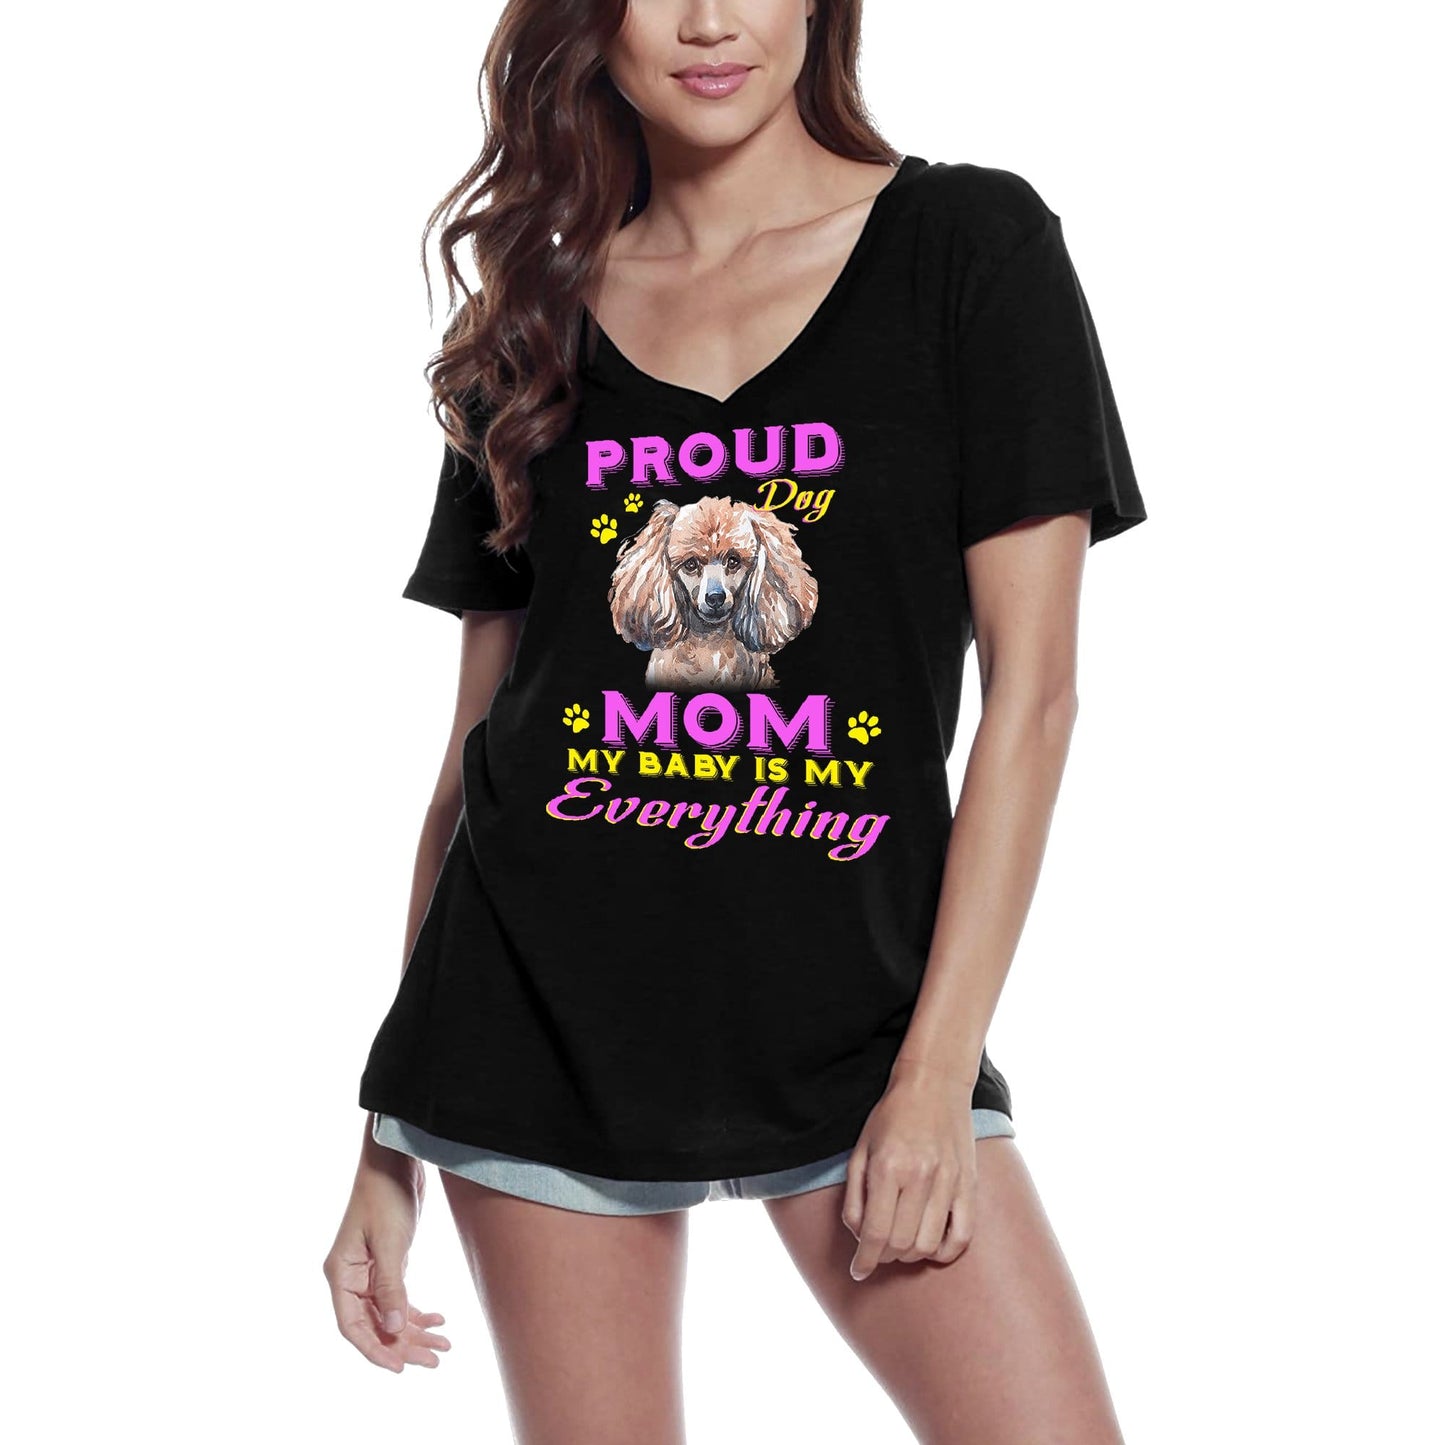 ULTRABASIC Women's T-Shirt Proud Day - Poodle Dog Mom - My Baby is My Everything